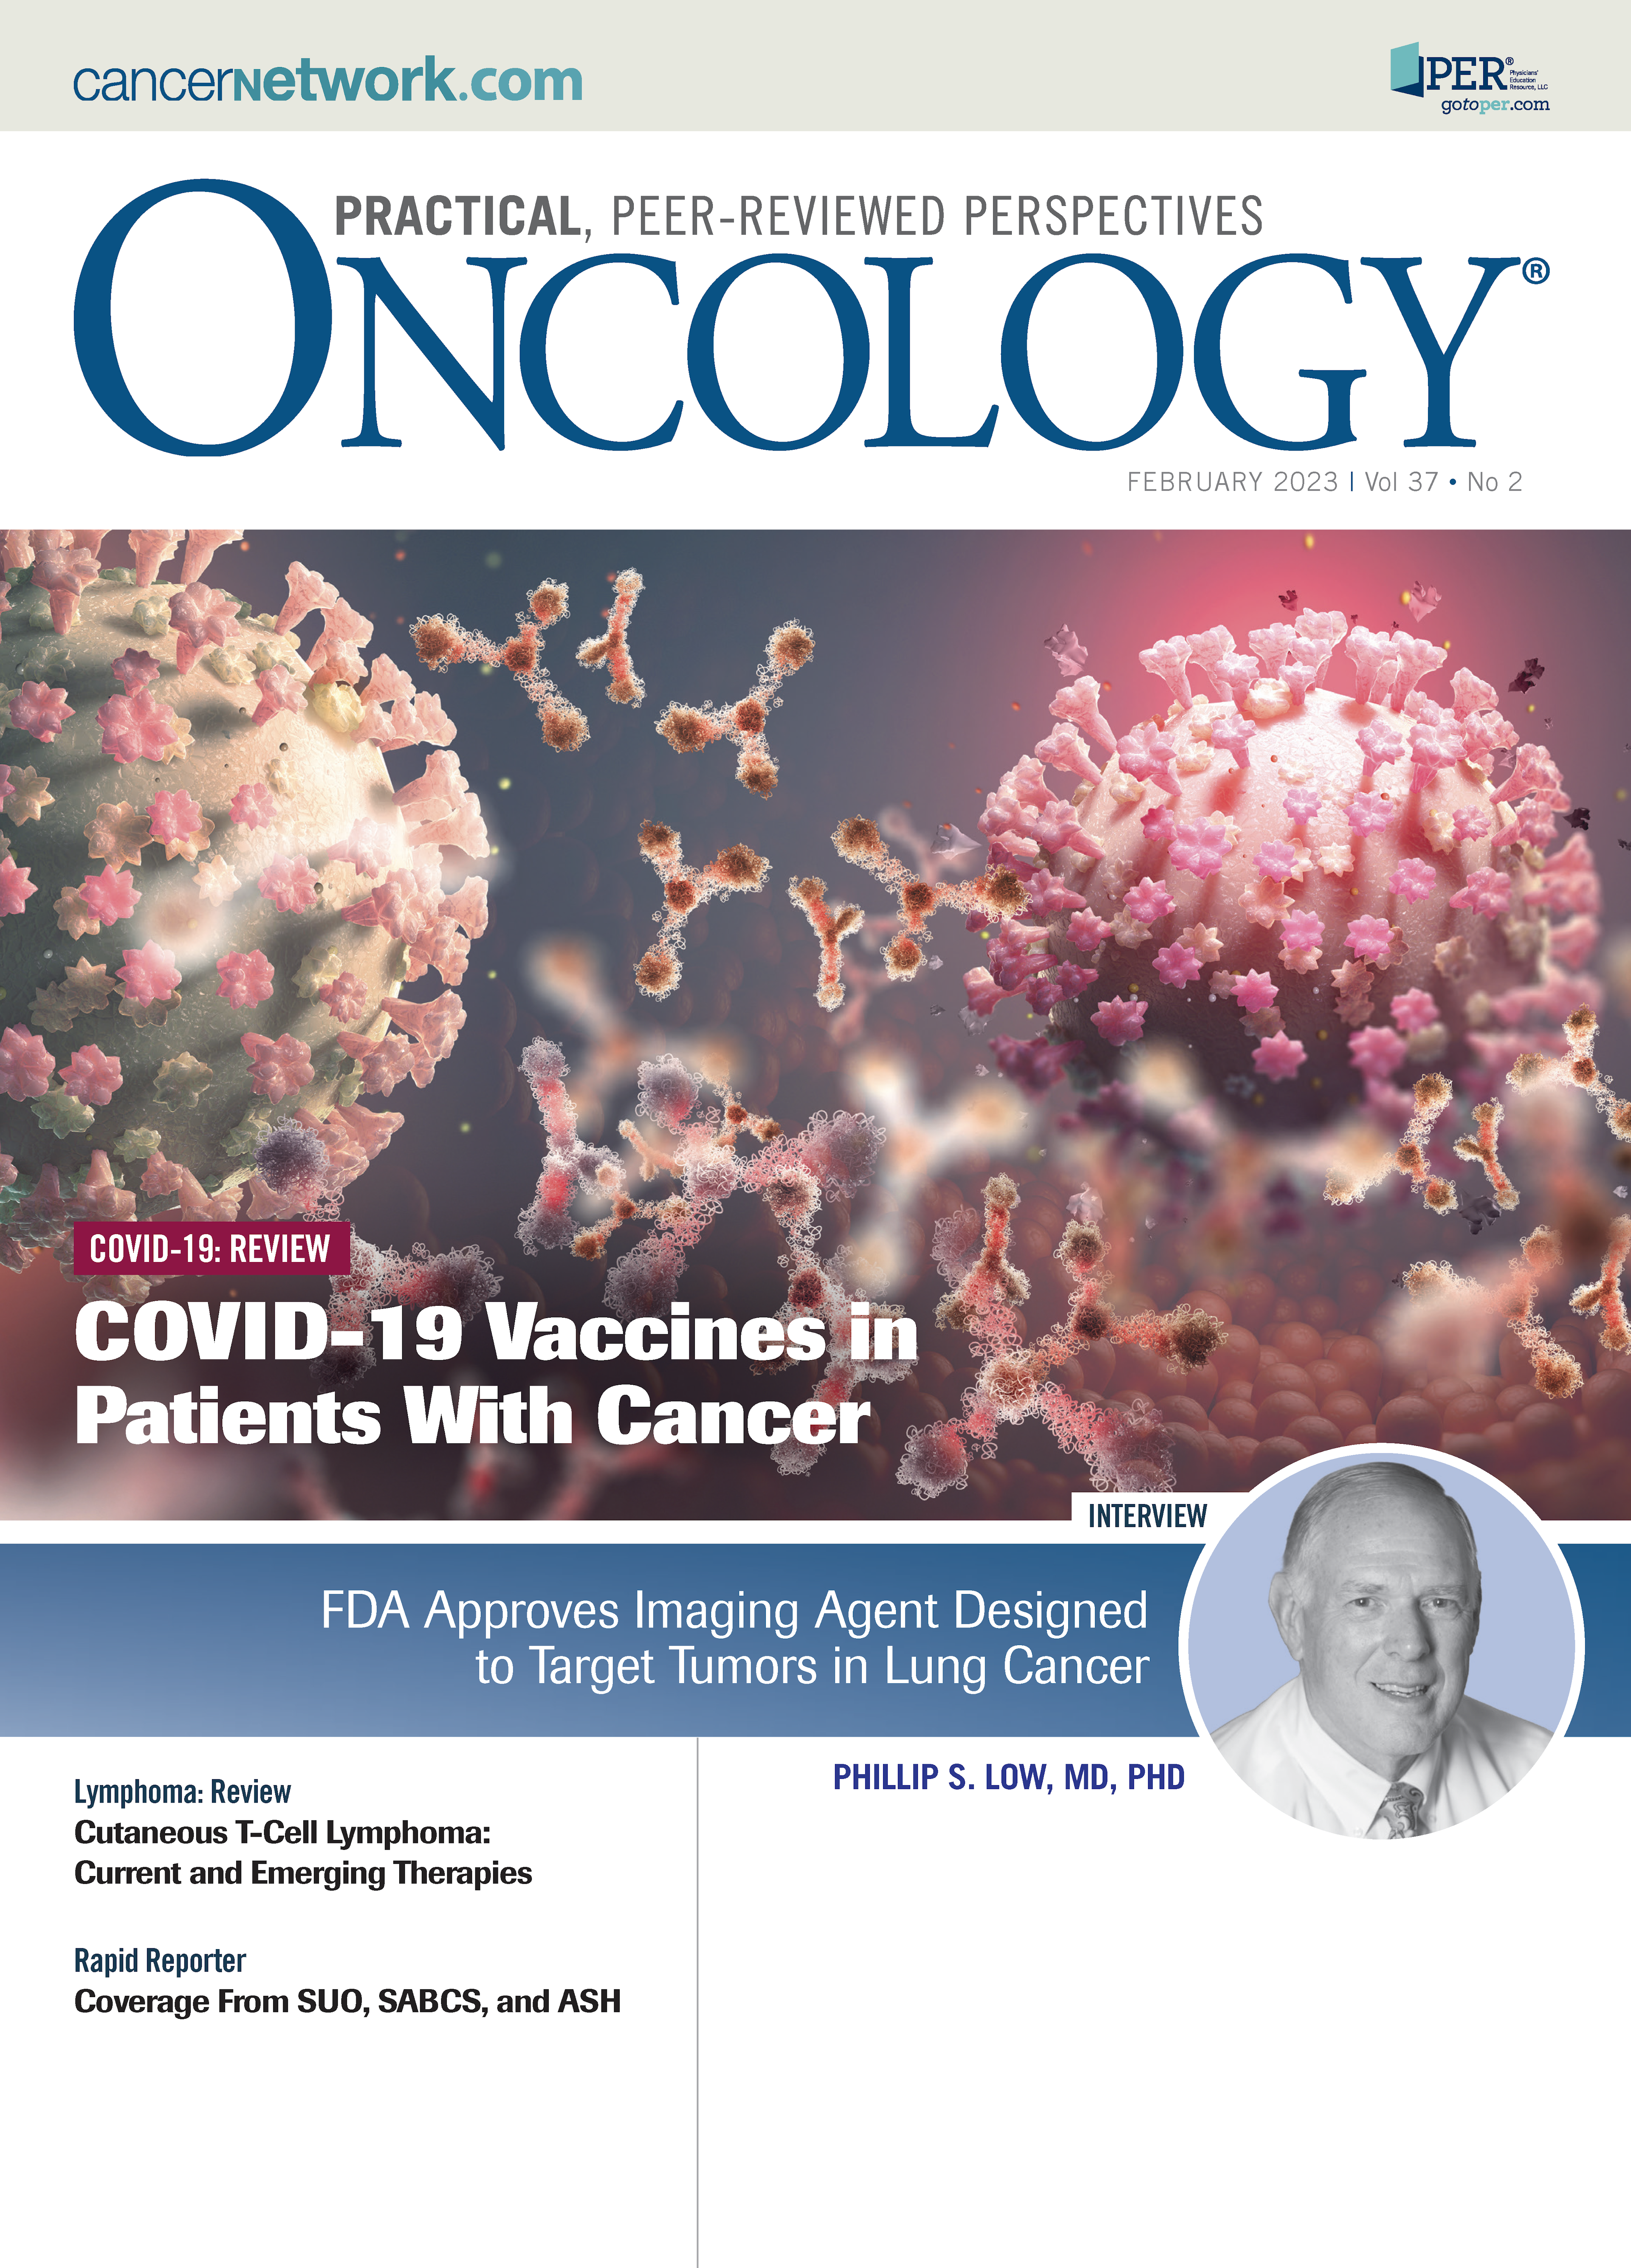 ONCOLOGY Vol 37, Issue 2